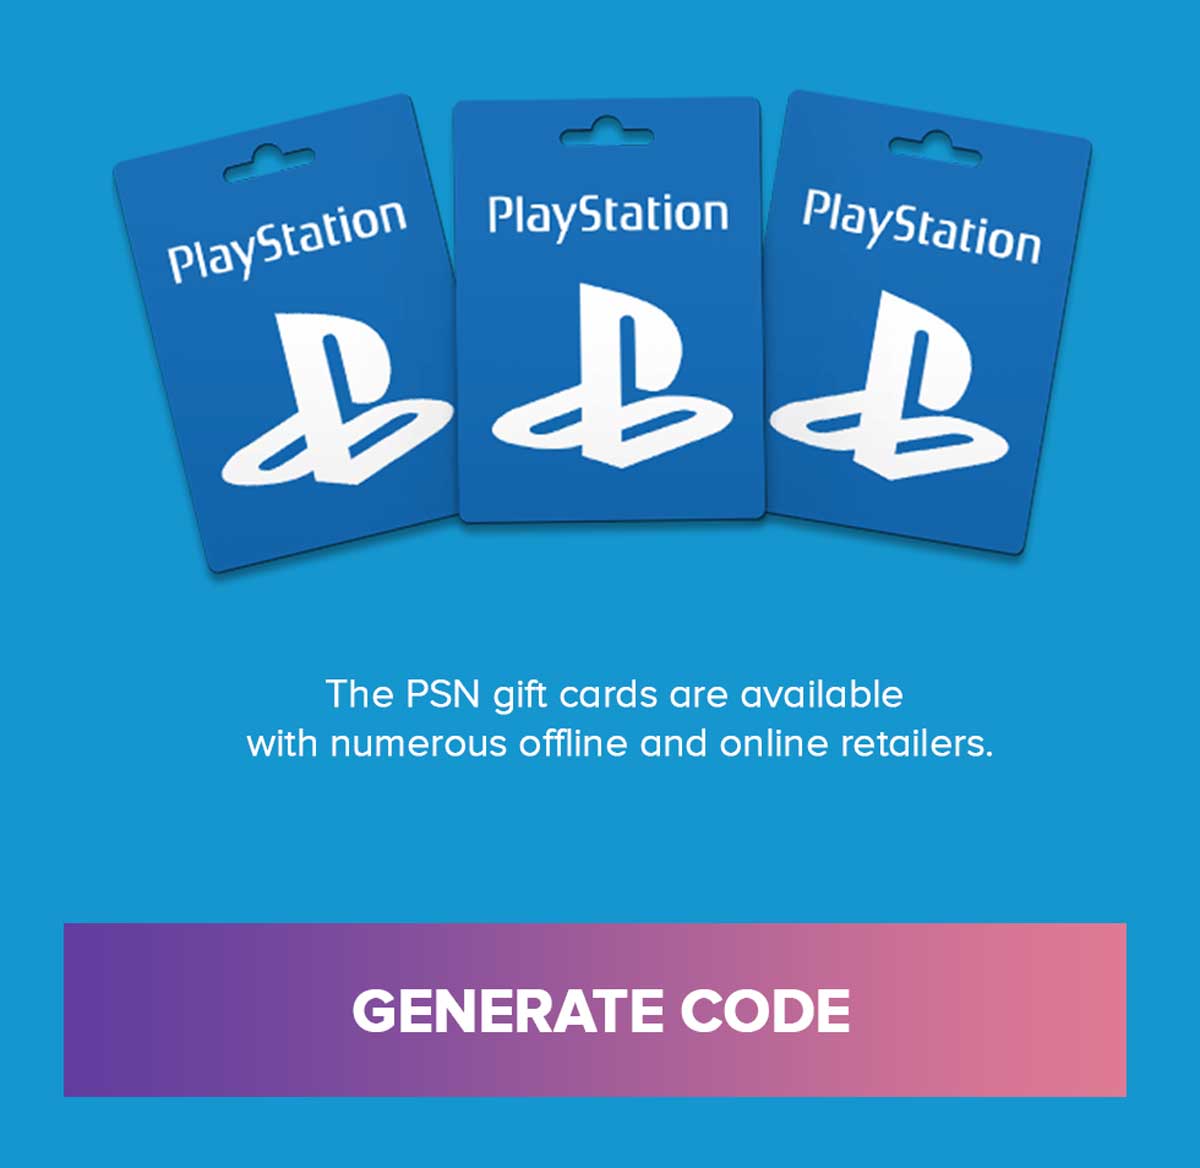 What exactly are PSN codes